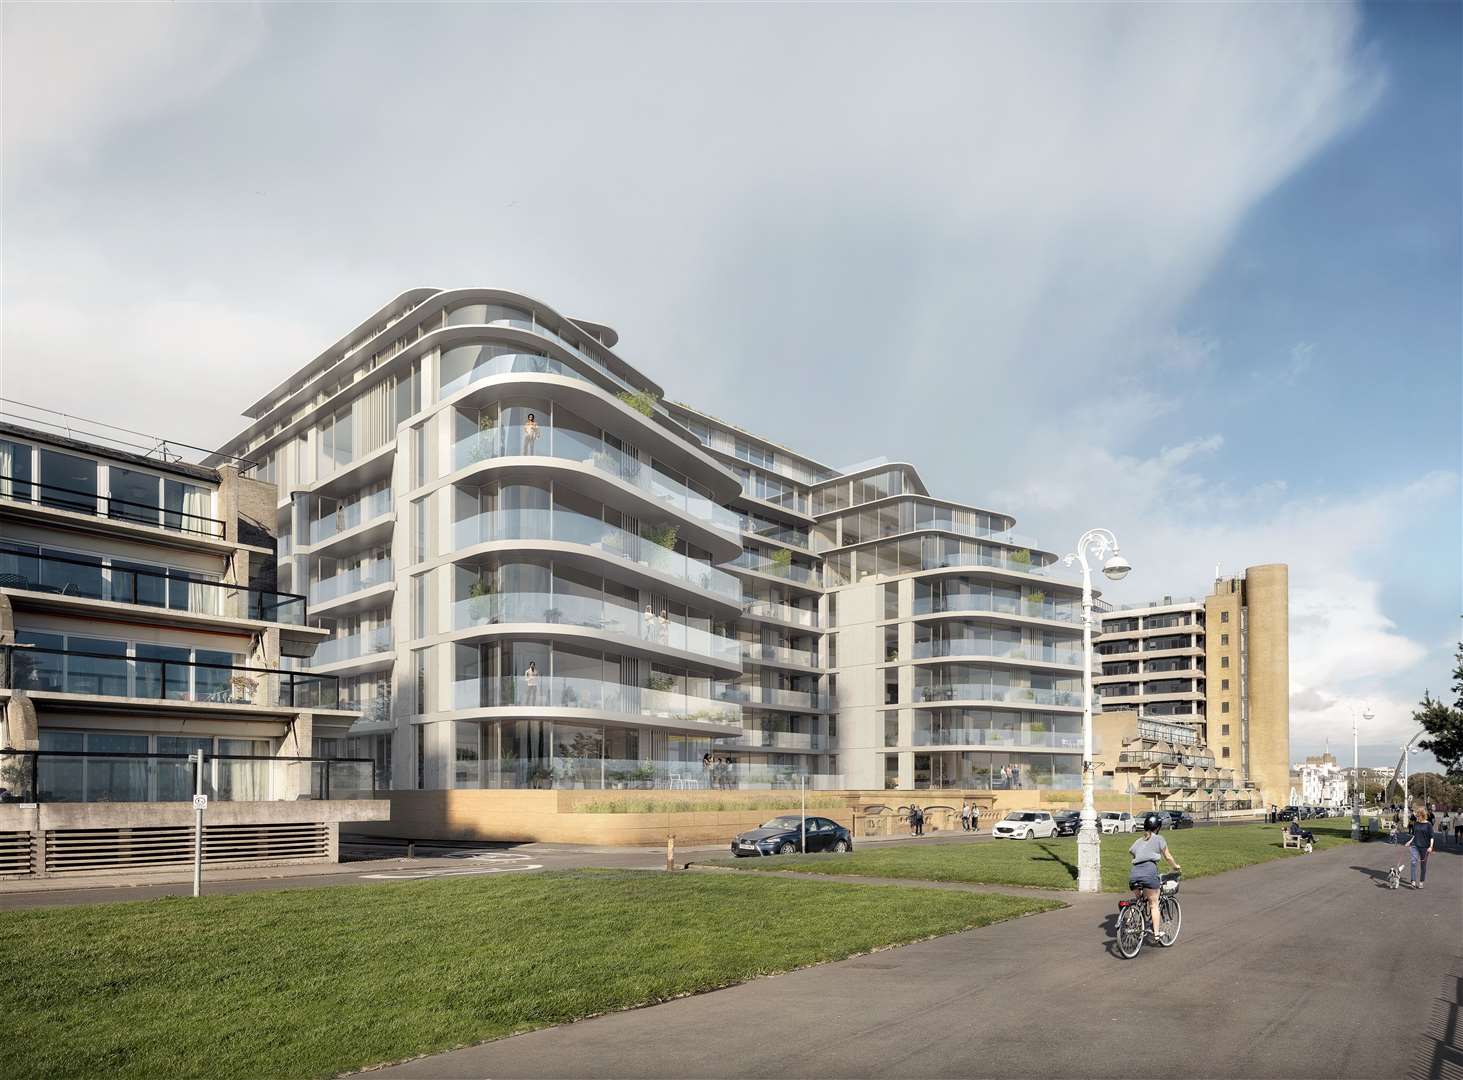 The new block will be nine storeys high and over look the Channel. Image: Hollaway